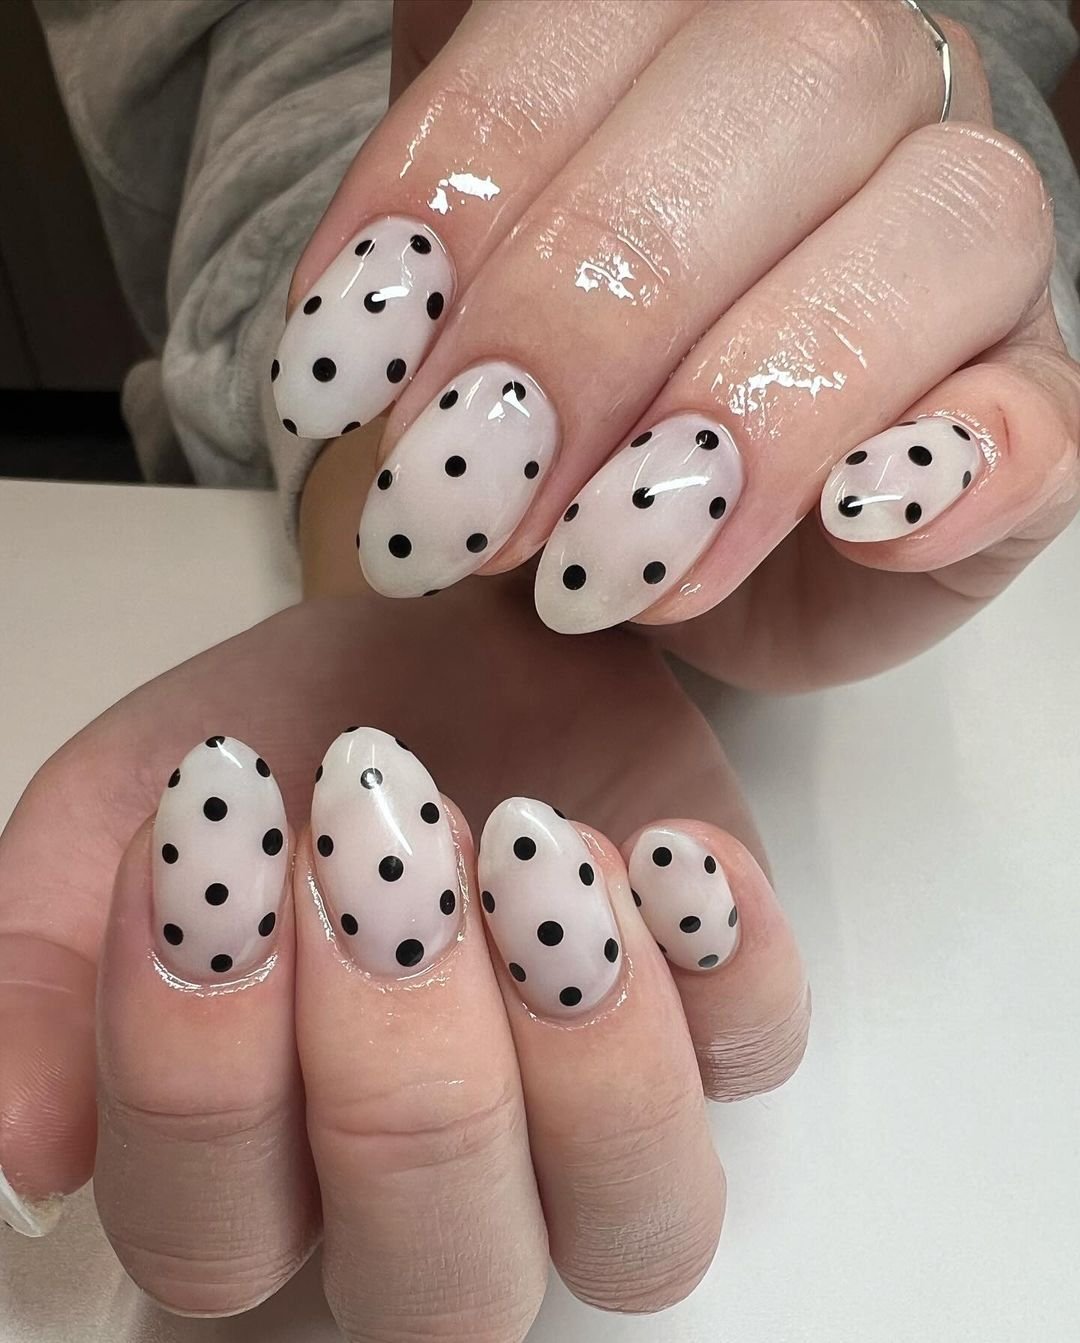 24 - Picture of Black and White Nails